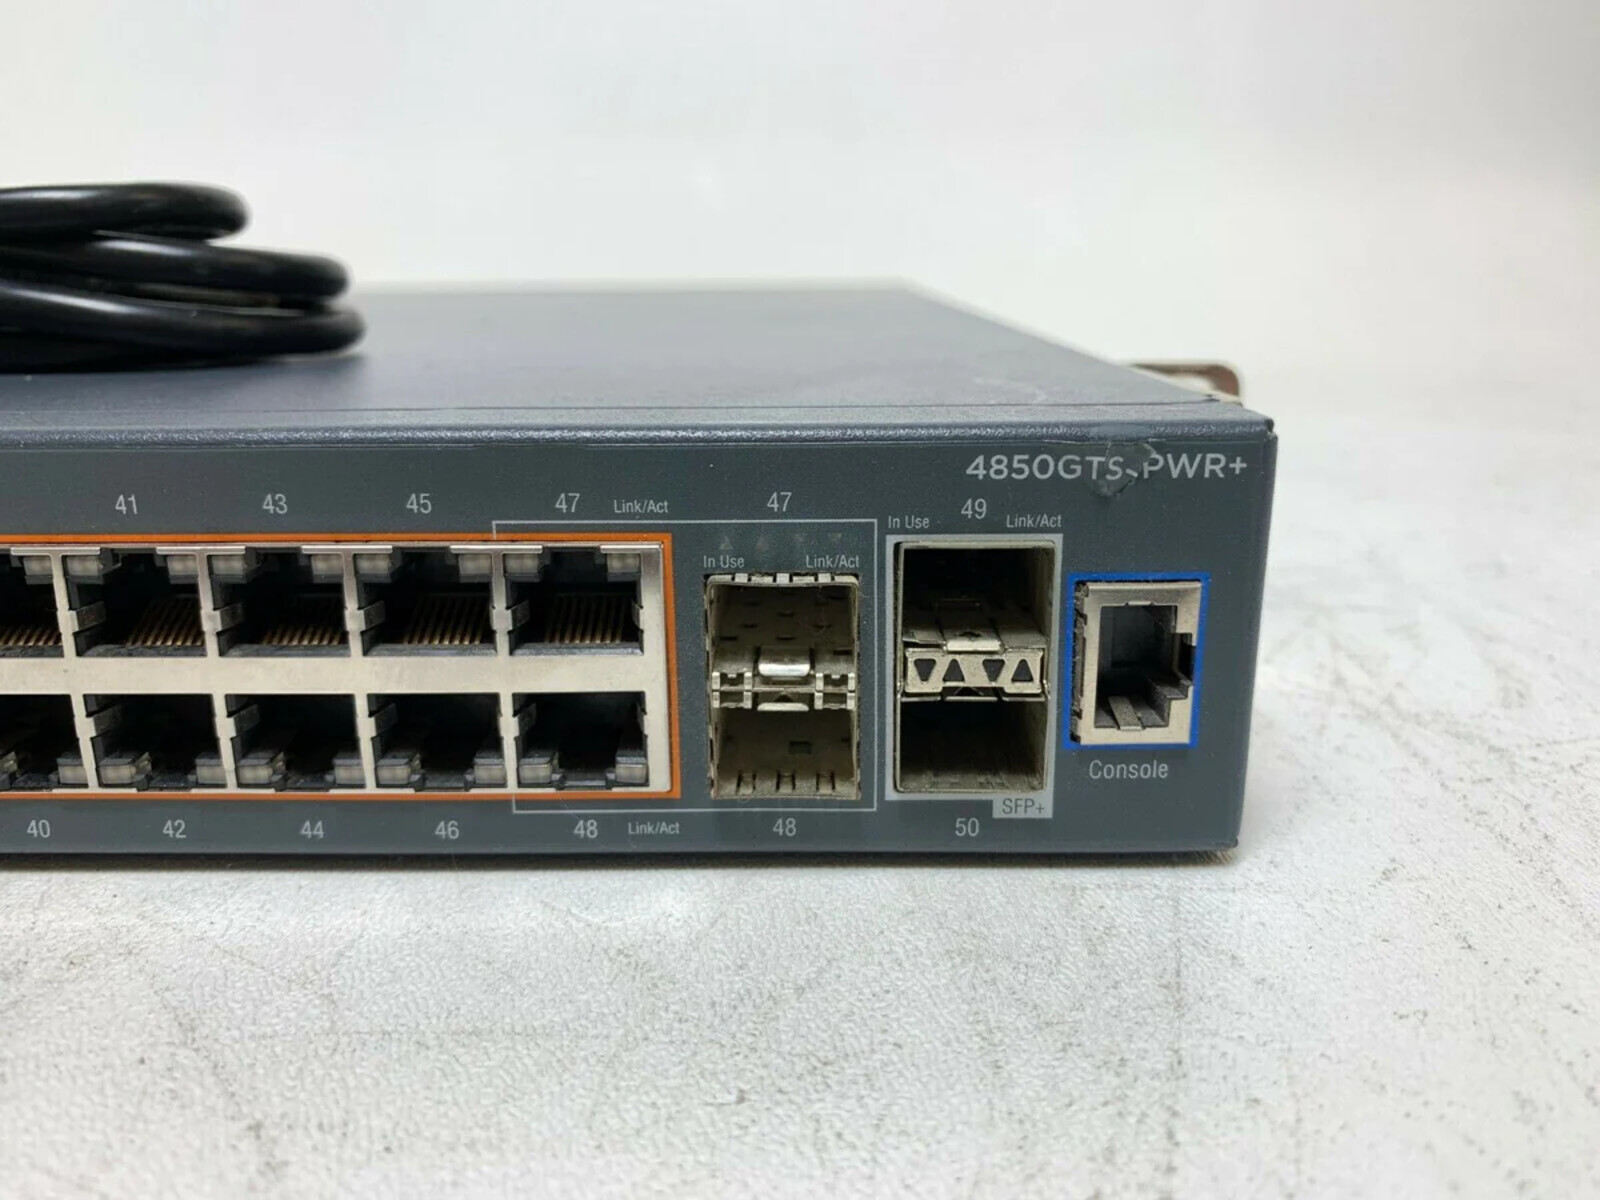 how-to-commission-your-avaya-titan-4850gts-pwr-network-switch-using-putty